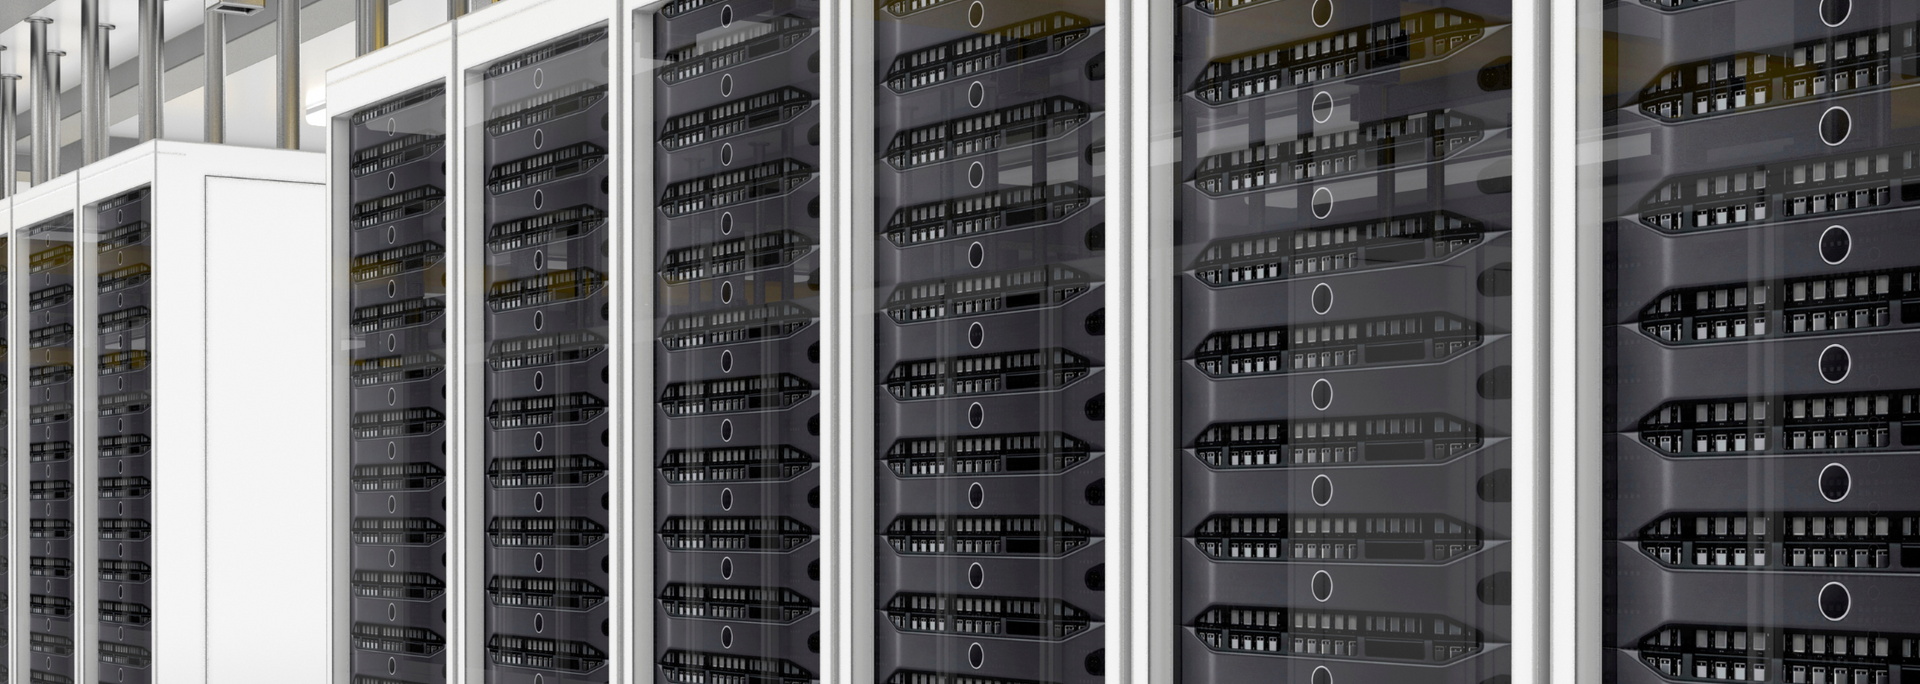 Picture of a rack of servers